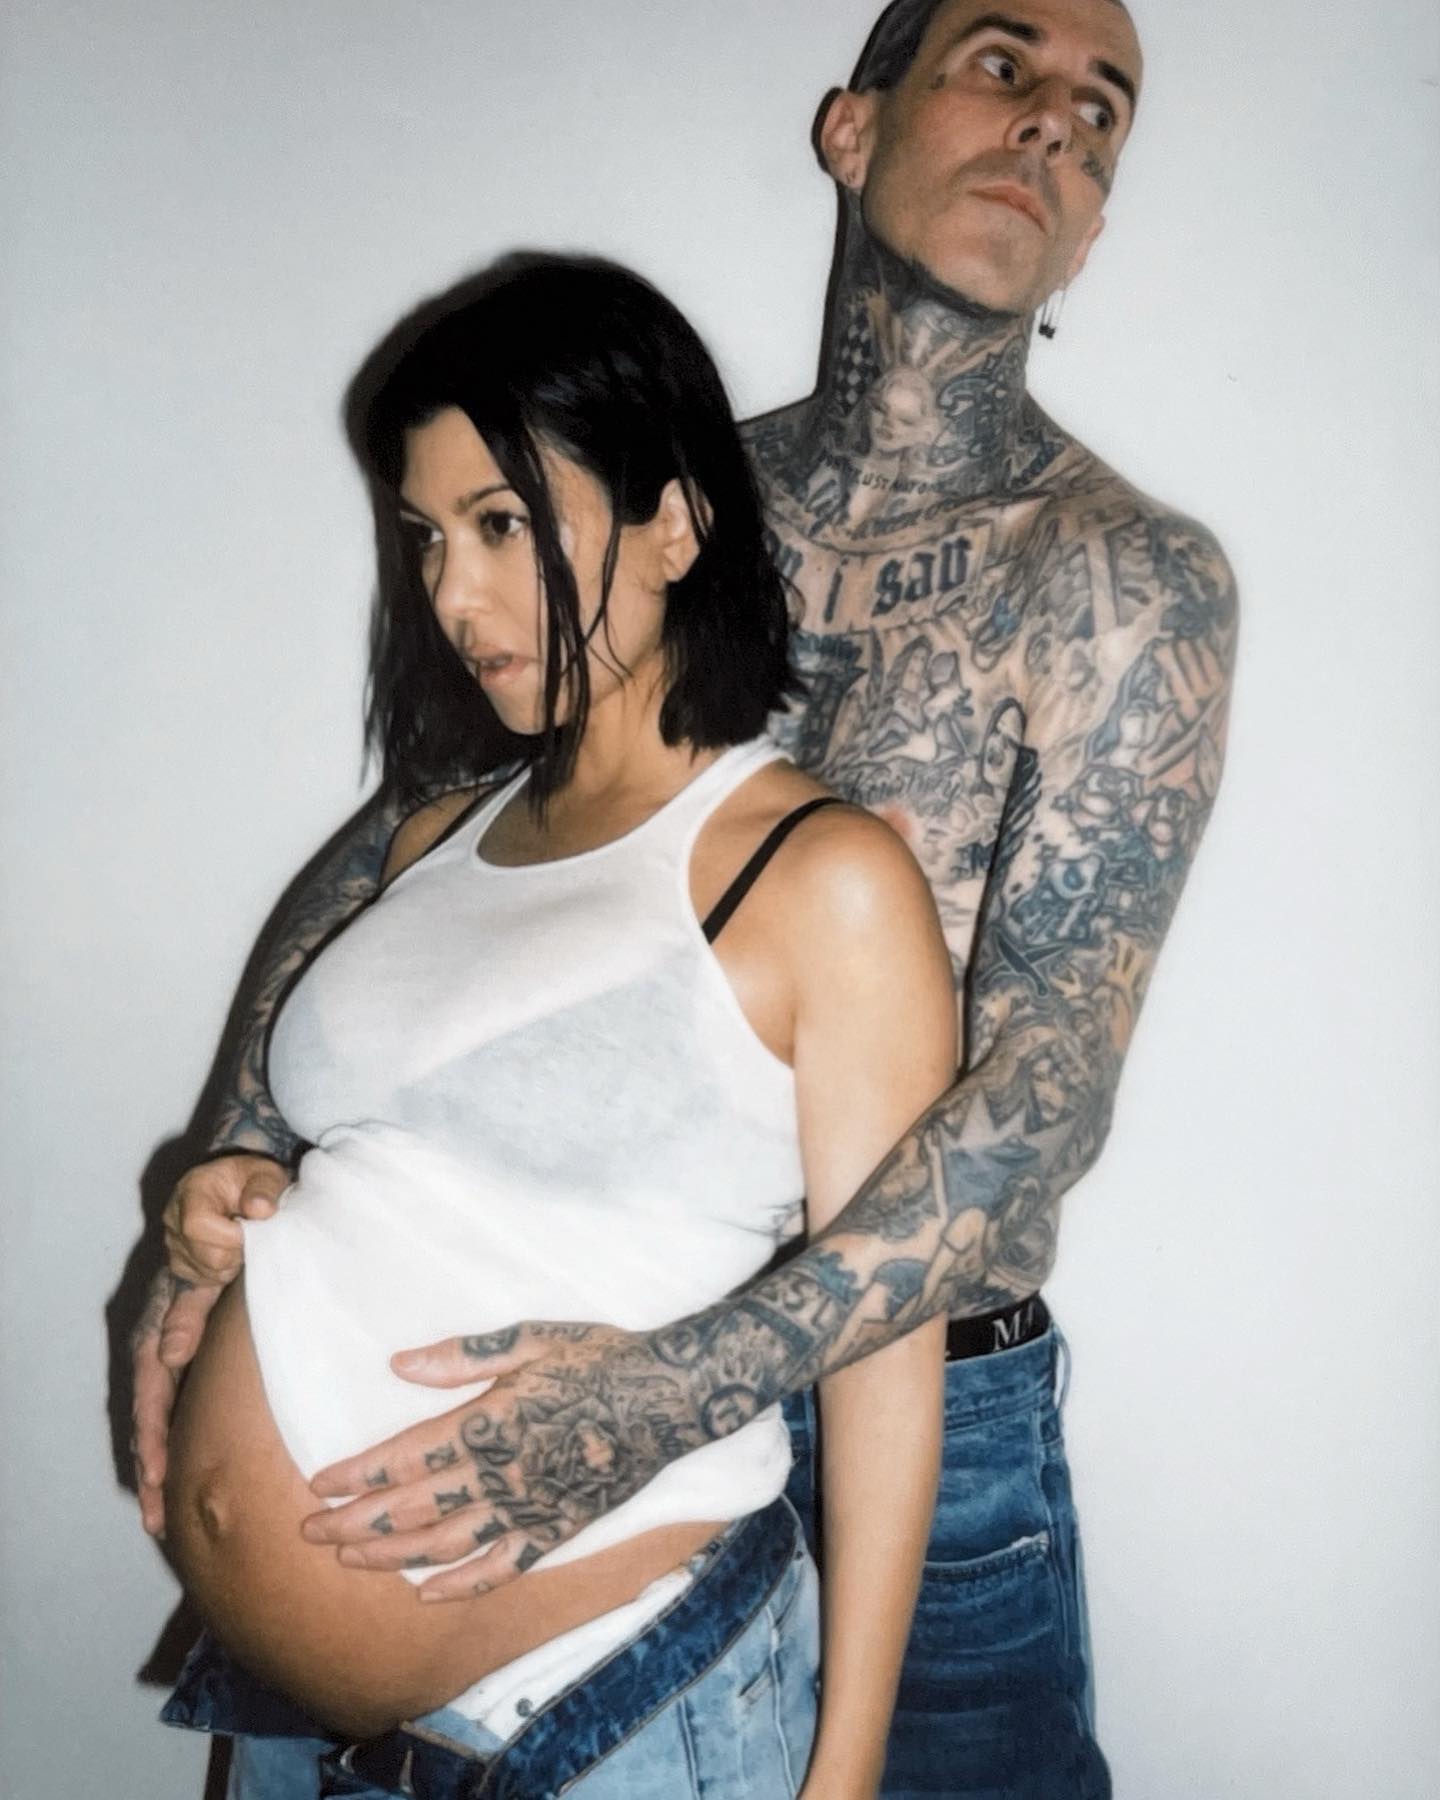 The drummer and his wife Kourtney gave birth to their first child together last month